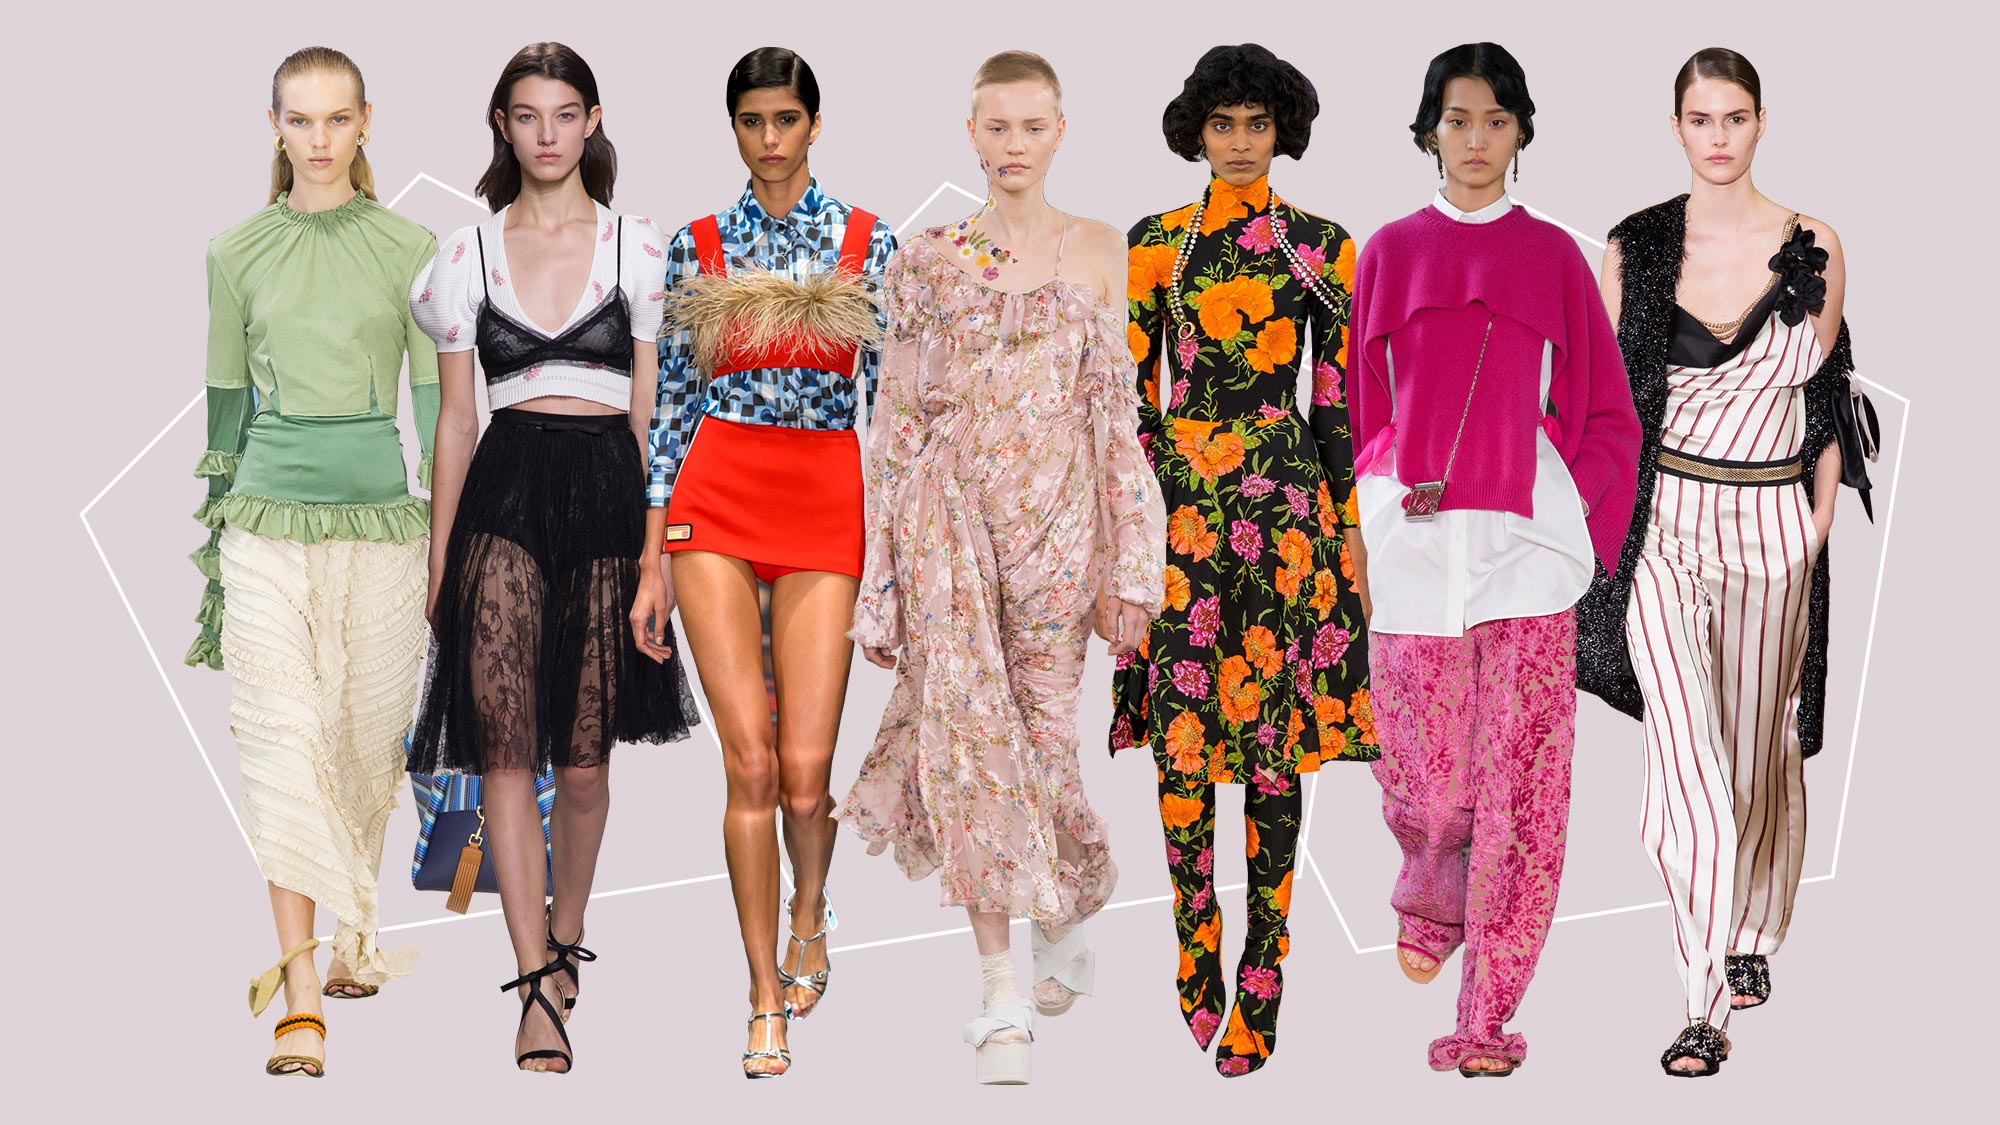 SS17 Fashion Trend Report The Best Women's Fashion Trends For Summer